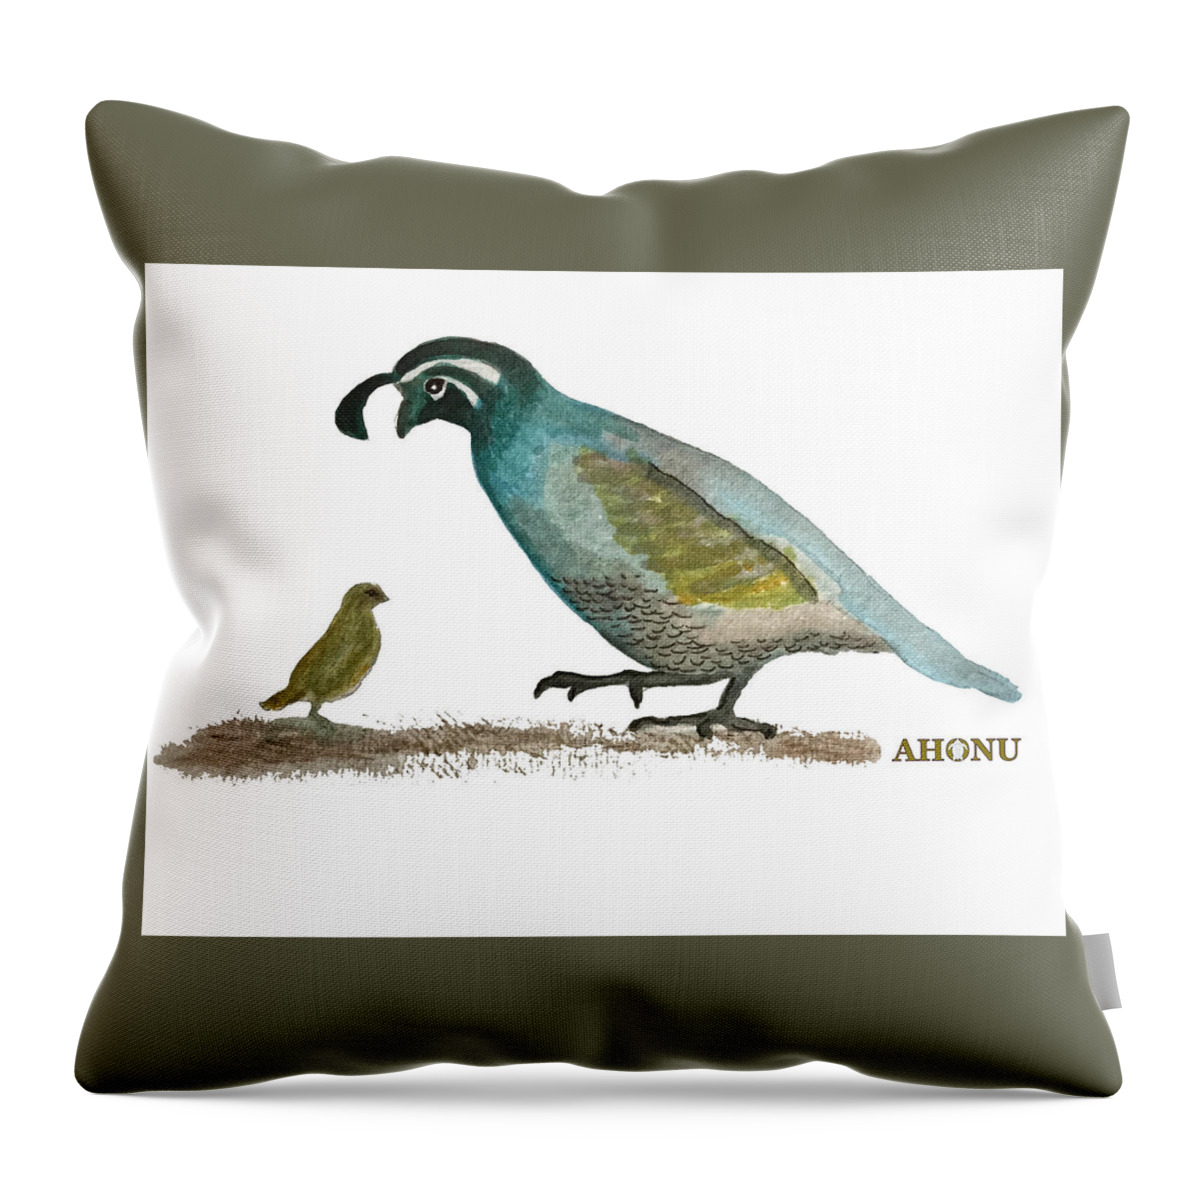 California Throw Pillow featuring the painting Baby Quail Learns The Rules by AHONU Aingeal Rose